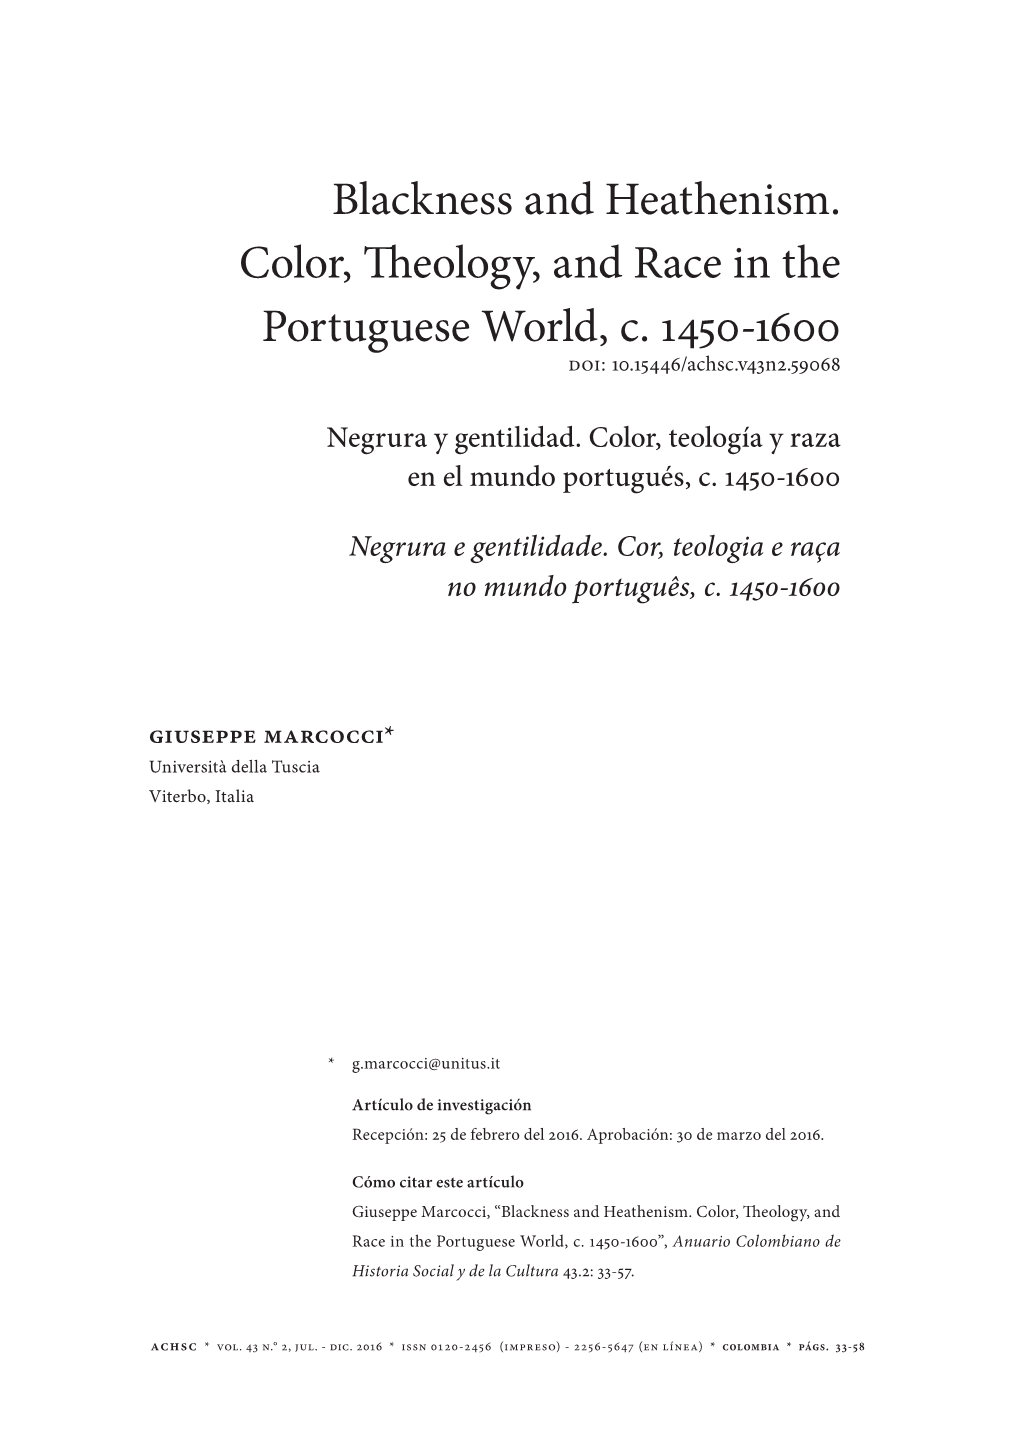 Blackness and Heathenism. Color, Theology, and Race in the Portuguese World, C